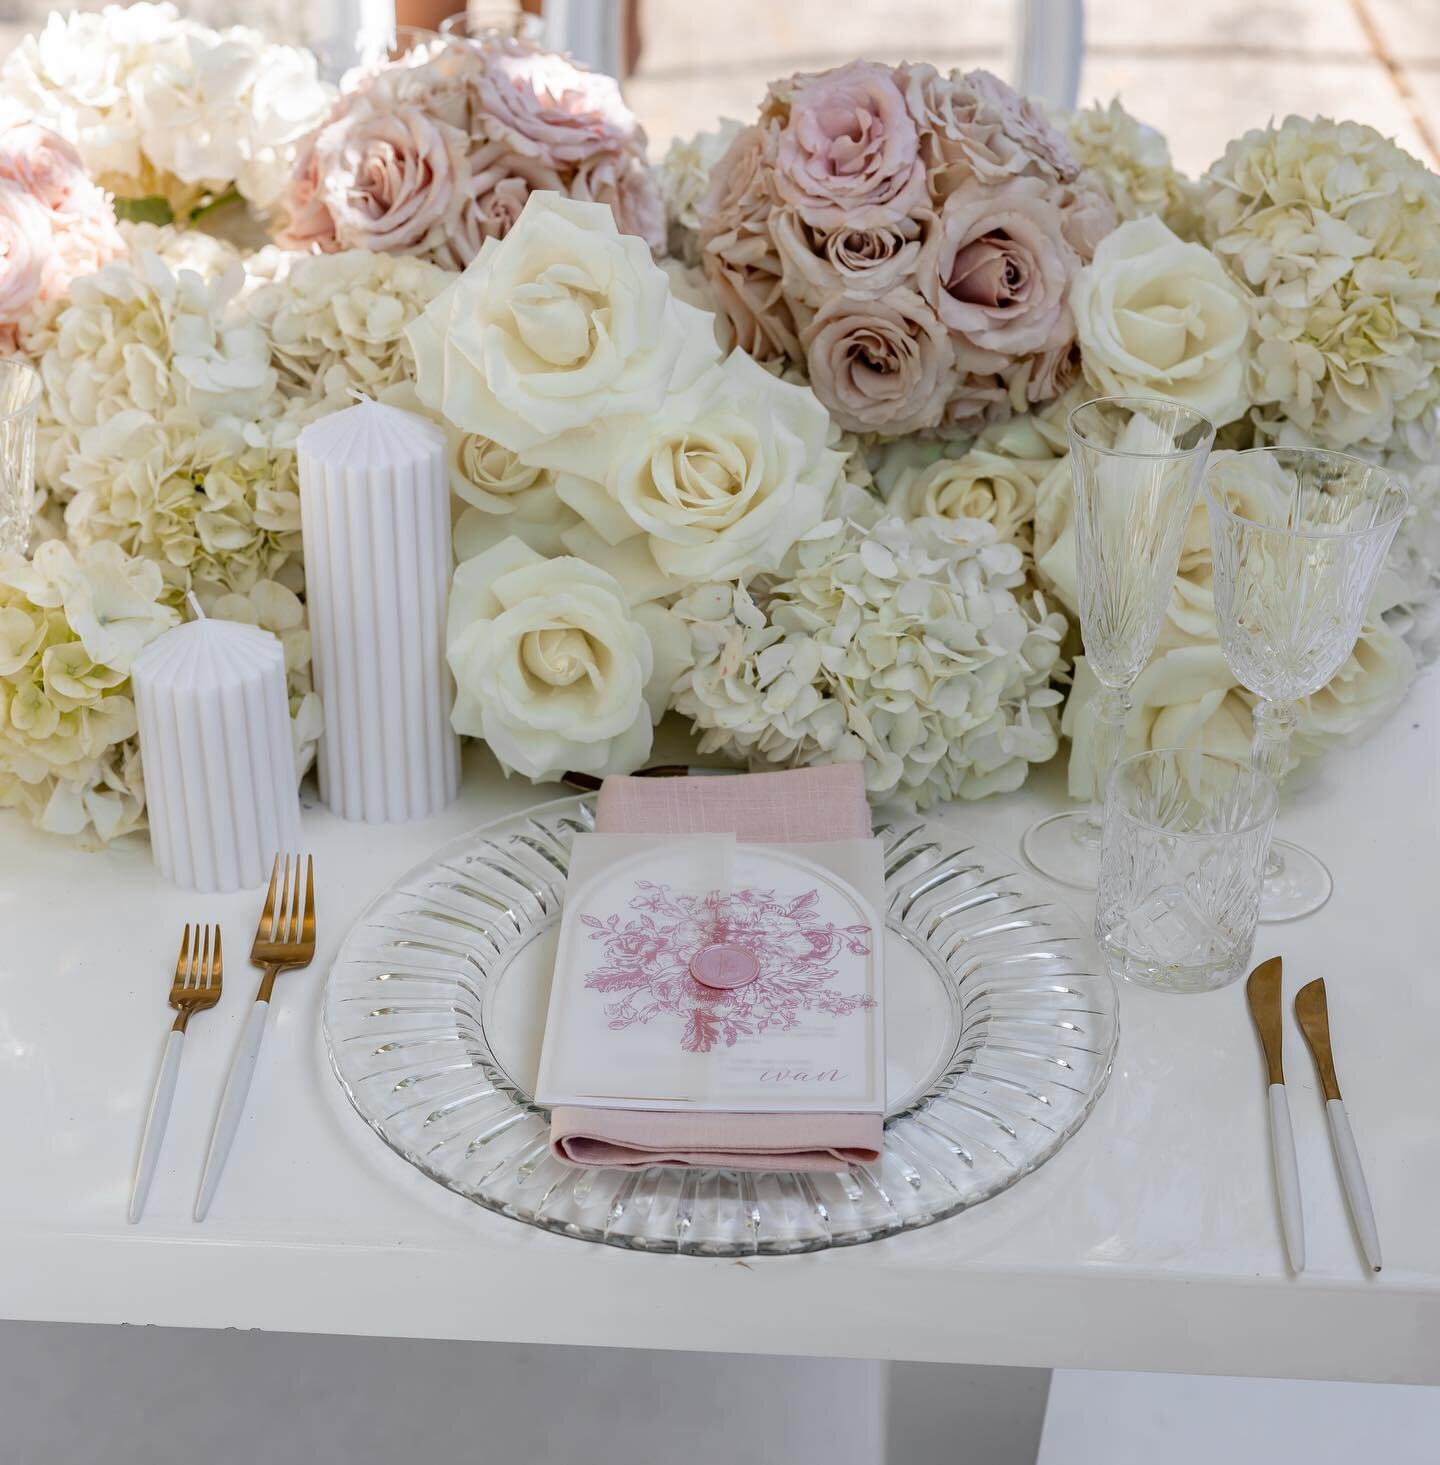 This place setting 🤩

Planning &amp; Styling @dianekhouryweddingsandevents | florals @johnemmanuelfloralevents | menus and design @dianekhouryweddingsandevents -: place setting and hire @white_label_hire | candles @lovedbylucyxo | photography @georg